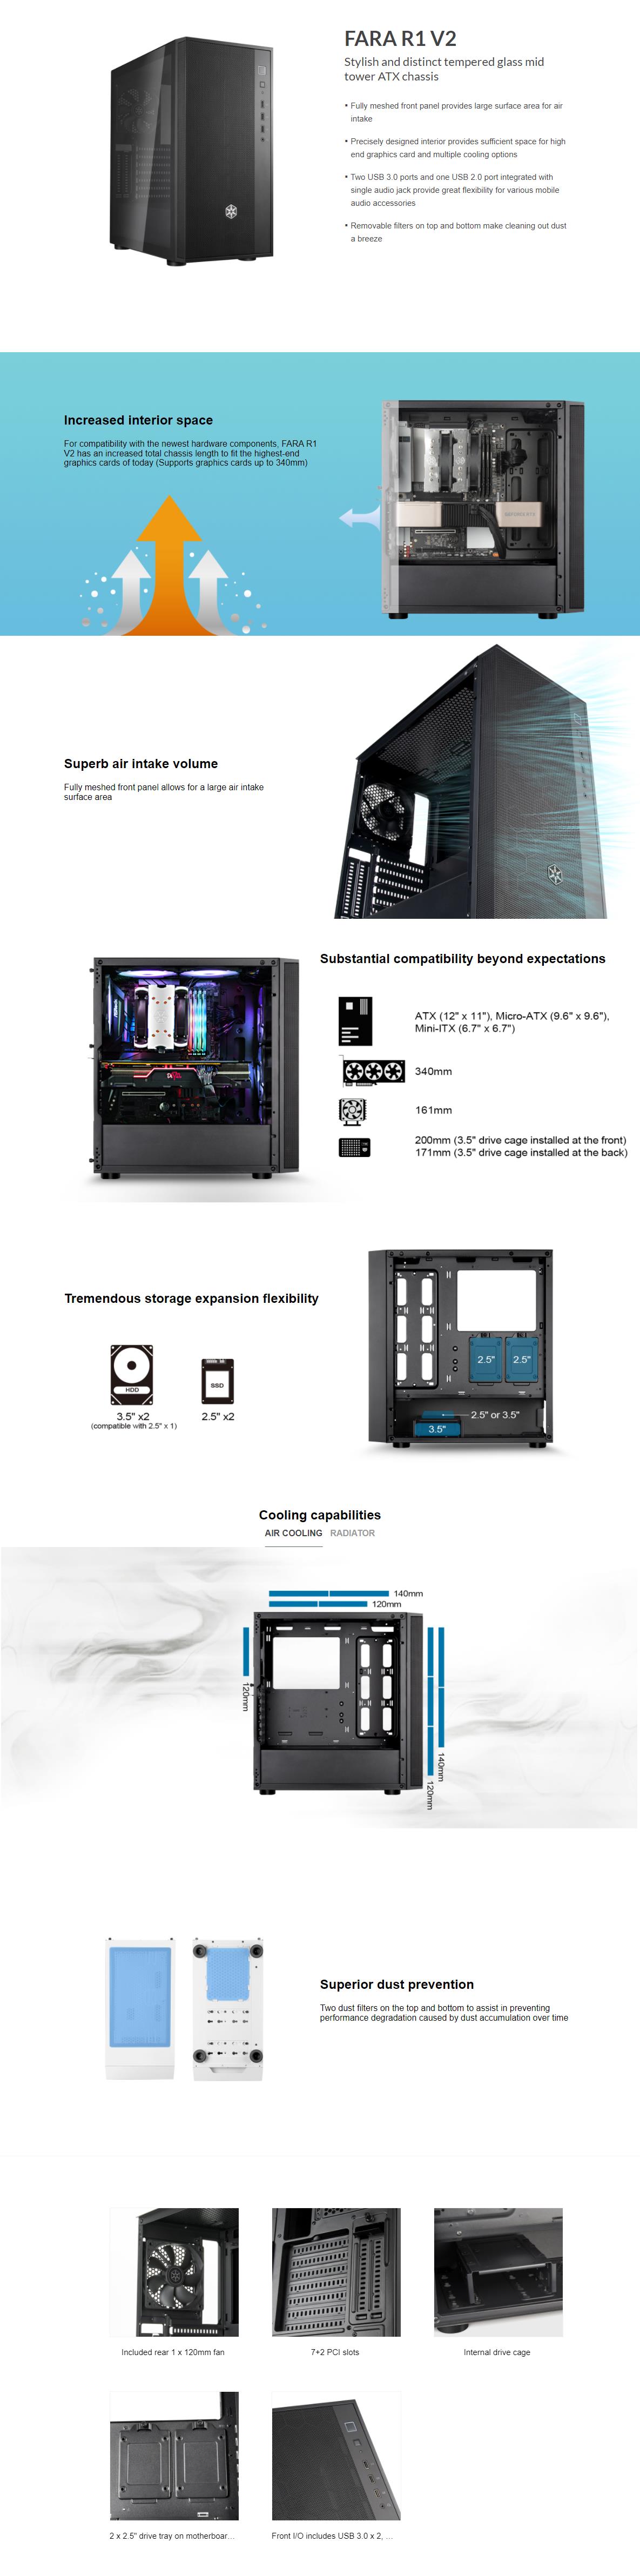 A large marketing image providing additional information about the product SilverStone FARA R1 V2 Mid Tower Case - Black - Additional alt info not provided